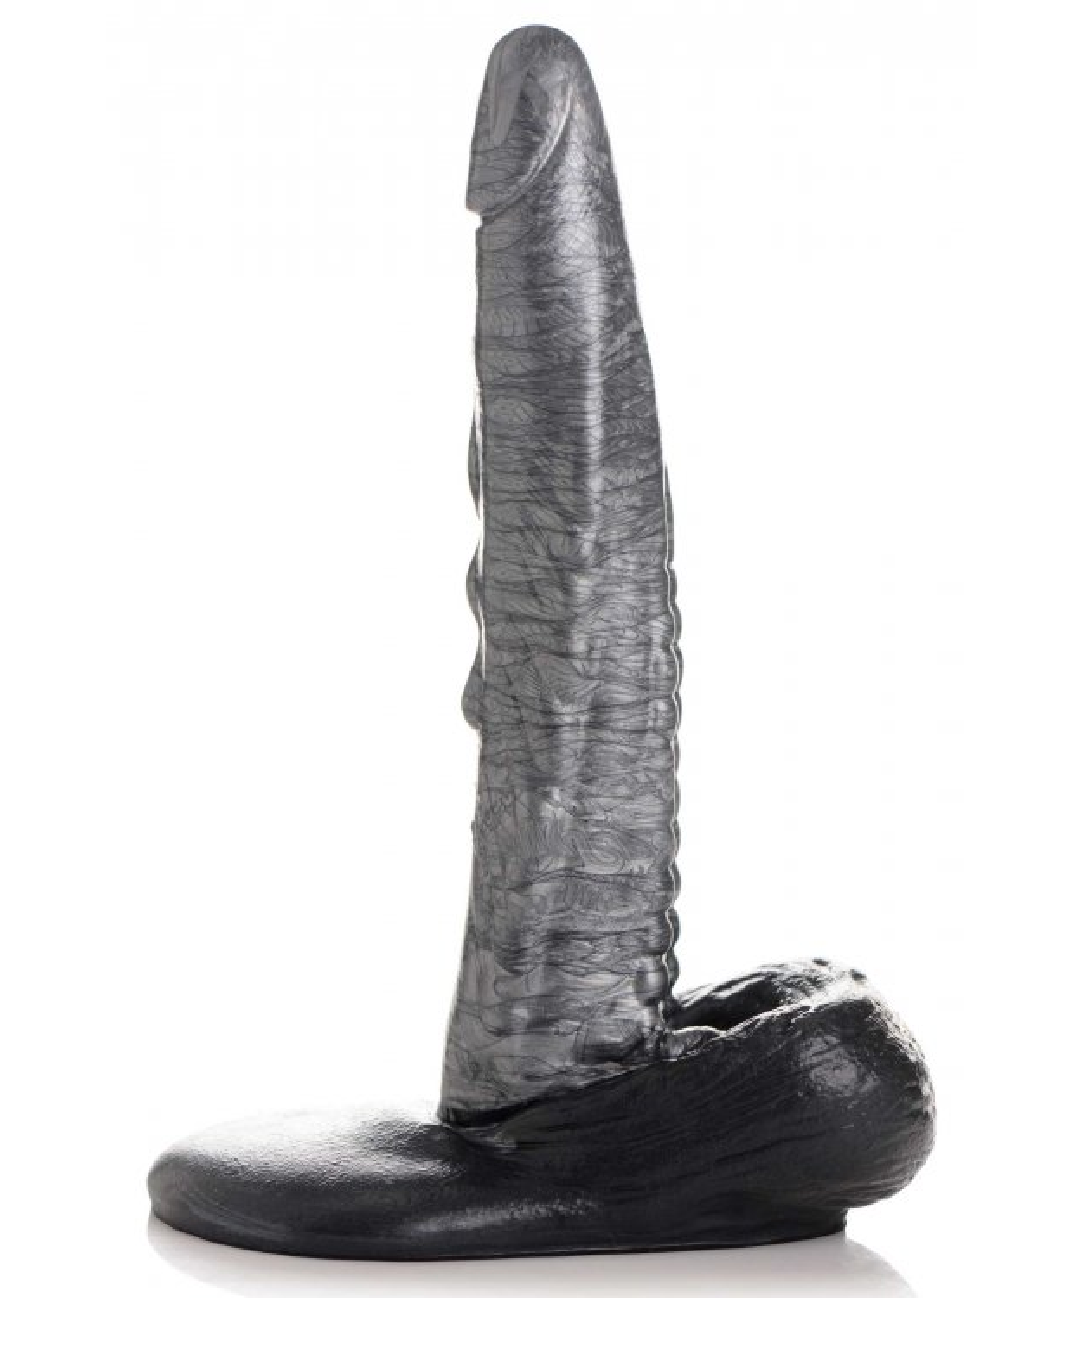 The Gargoyle Rock Hard 9 Inch Silicone Fantasy Dildo side view of balls and shaft